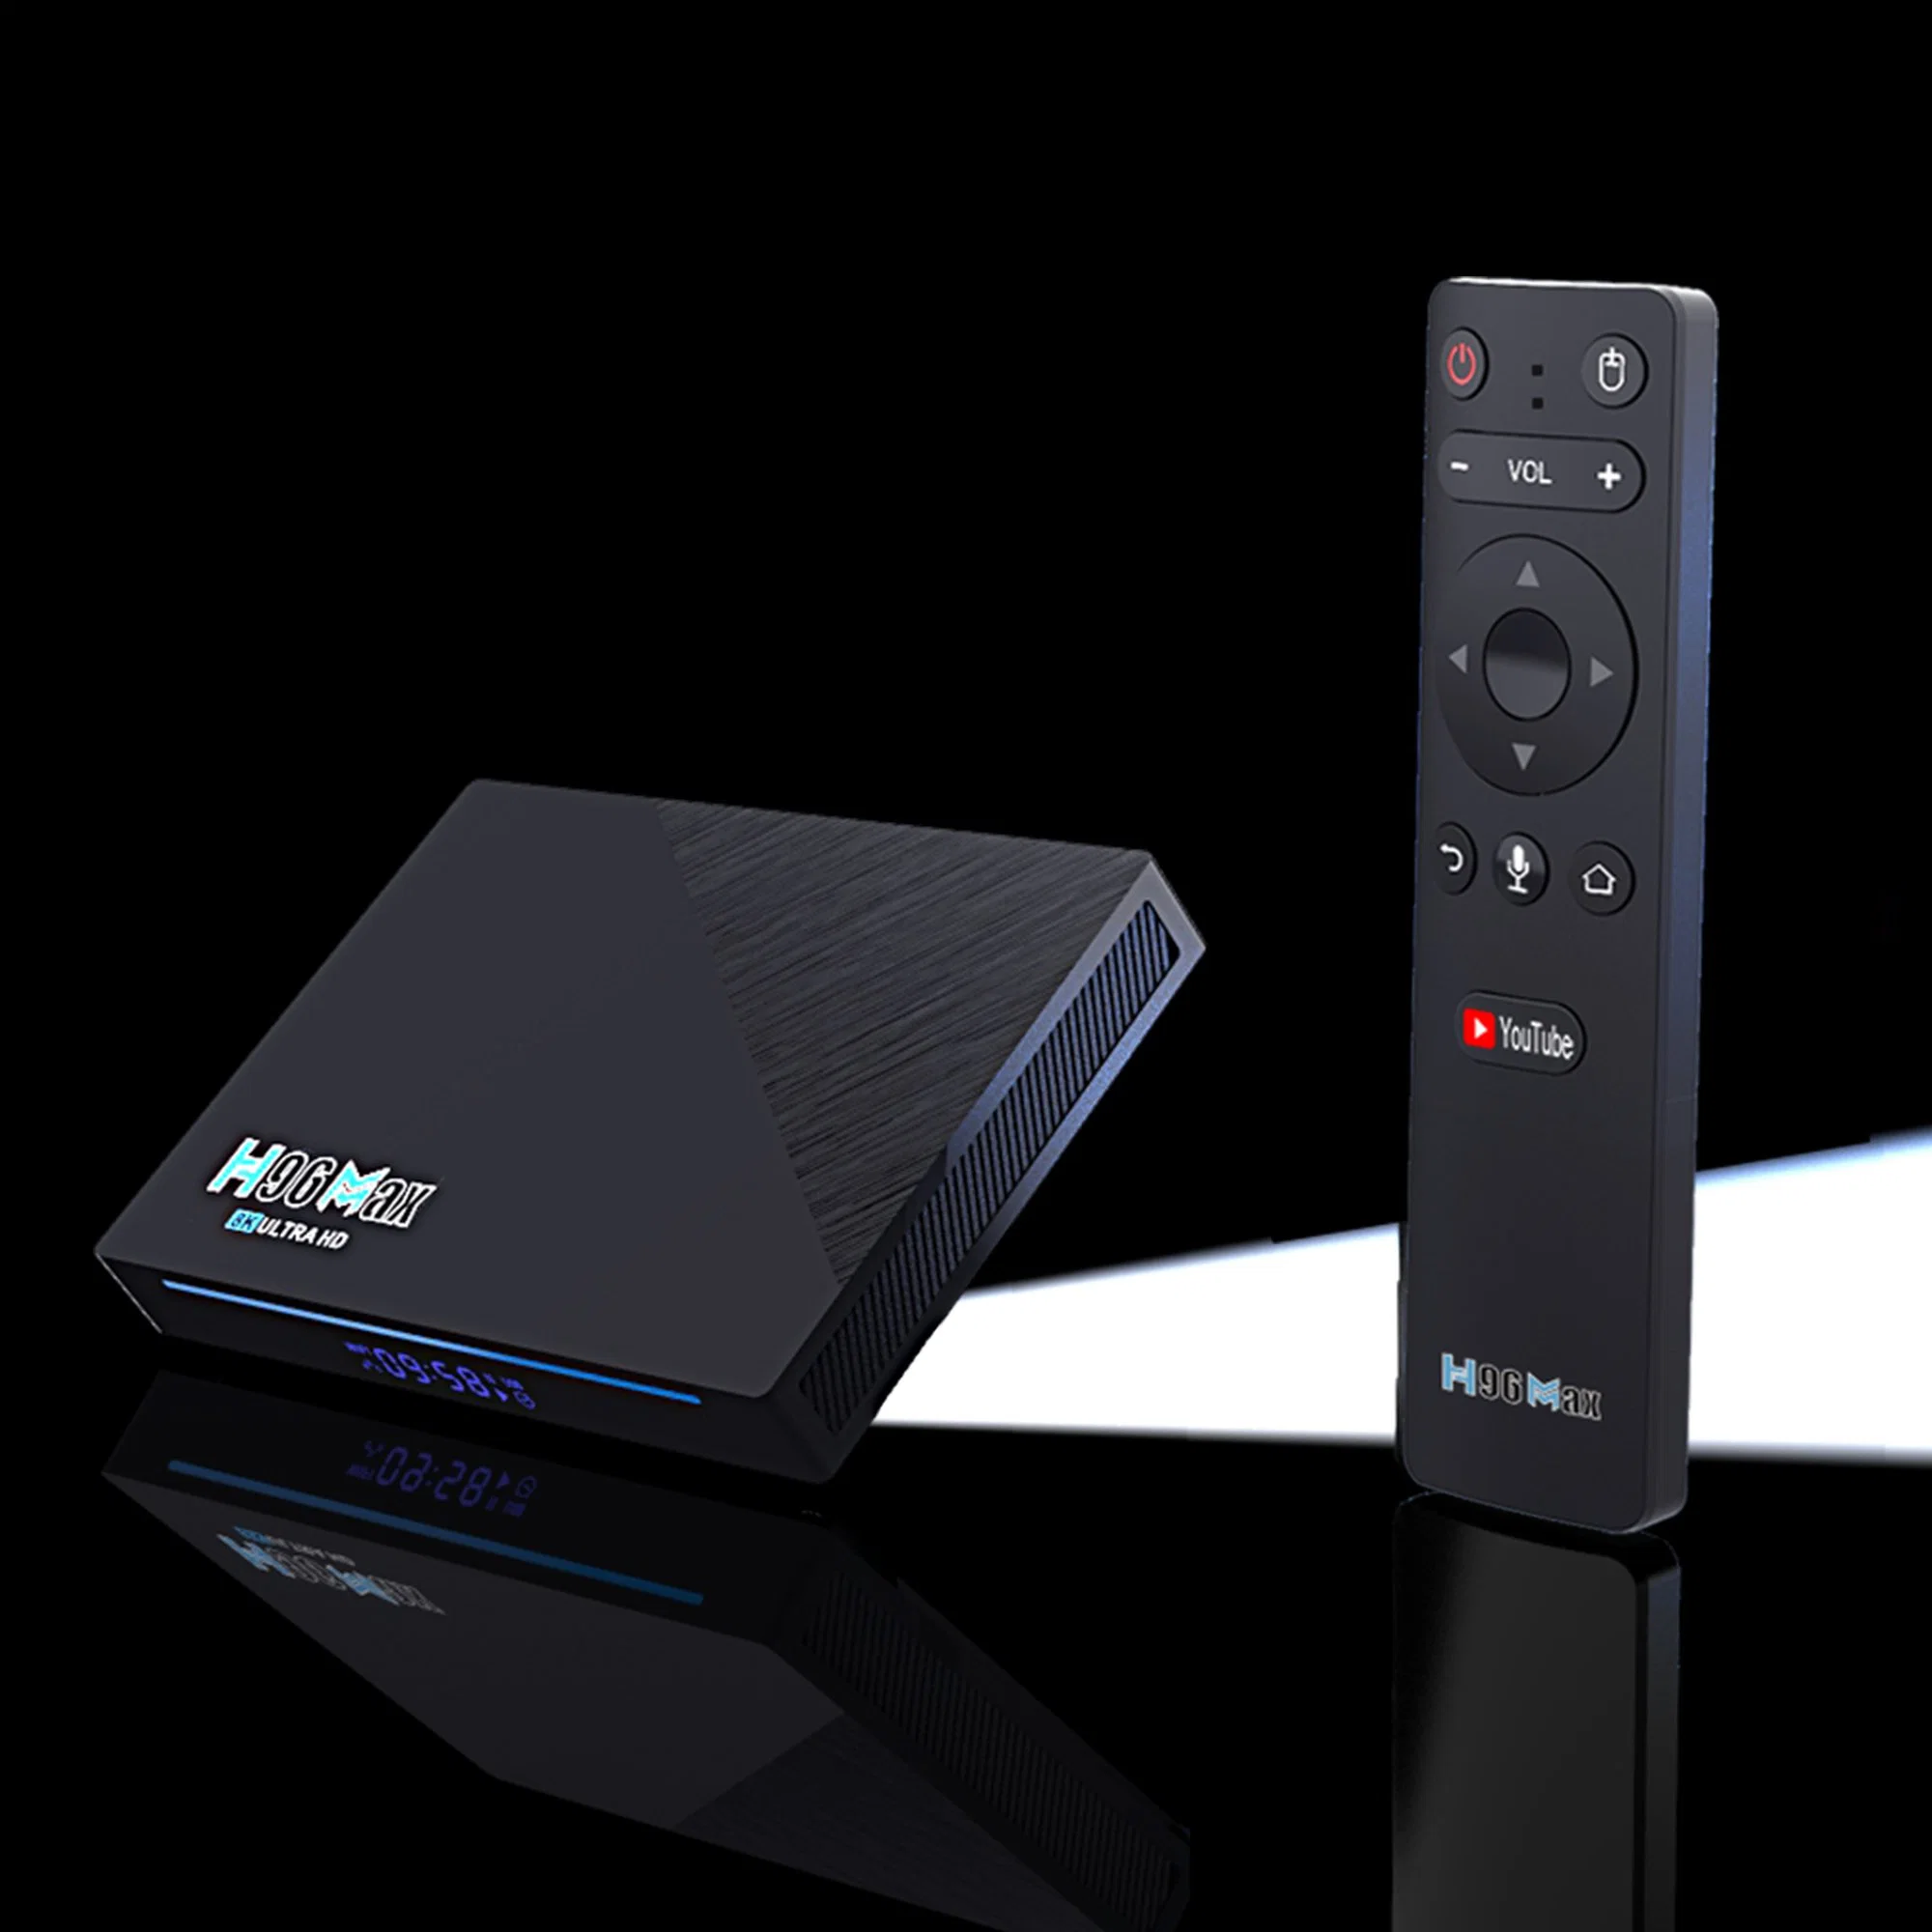 2022 The New IPTV Subscription H96 Max Rk3566 Android 11 TV Box DDR4 8g RAM 128g ROM Rk3566 8K Bt Voice Control 5g Dual WiFi 1000m LAN 4K Youtube Set Top Box